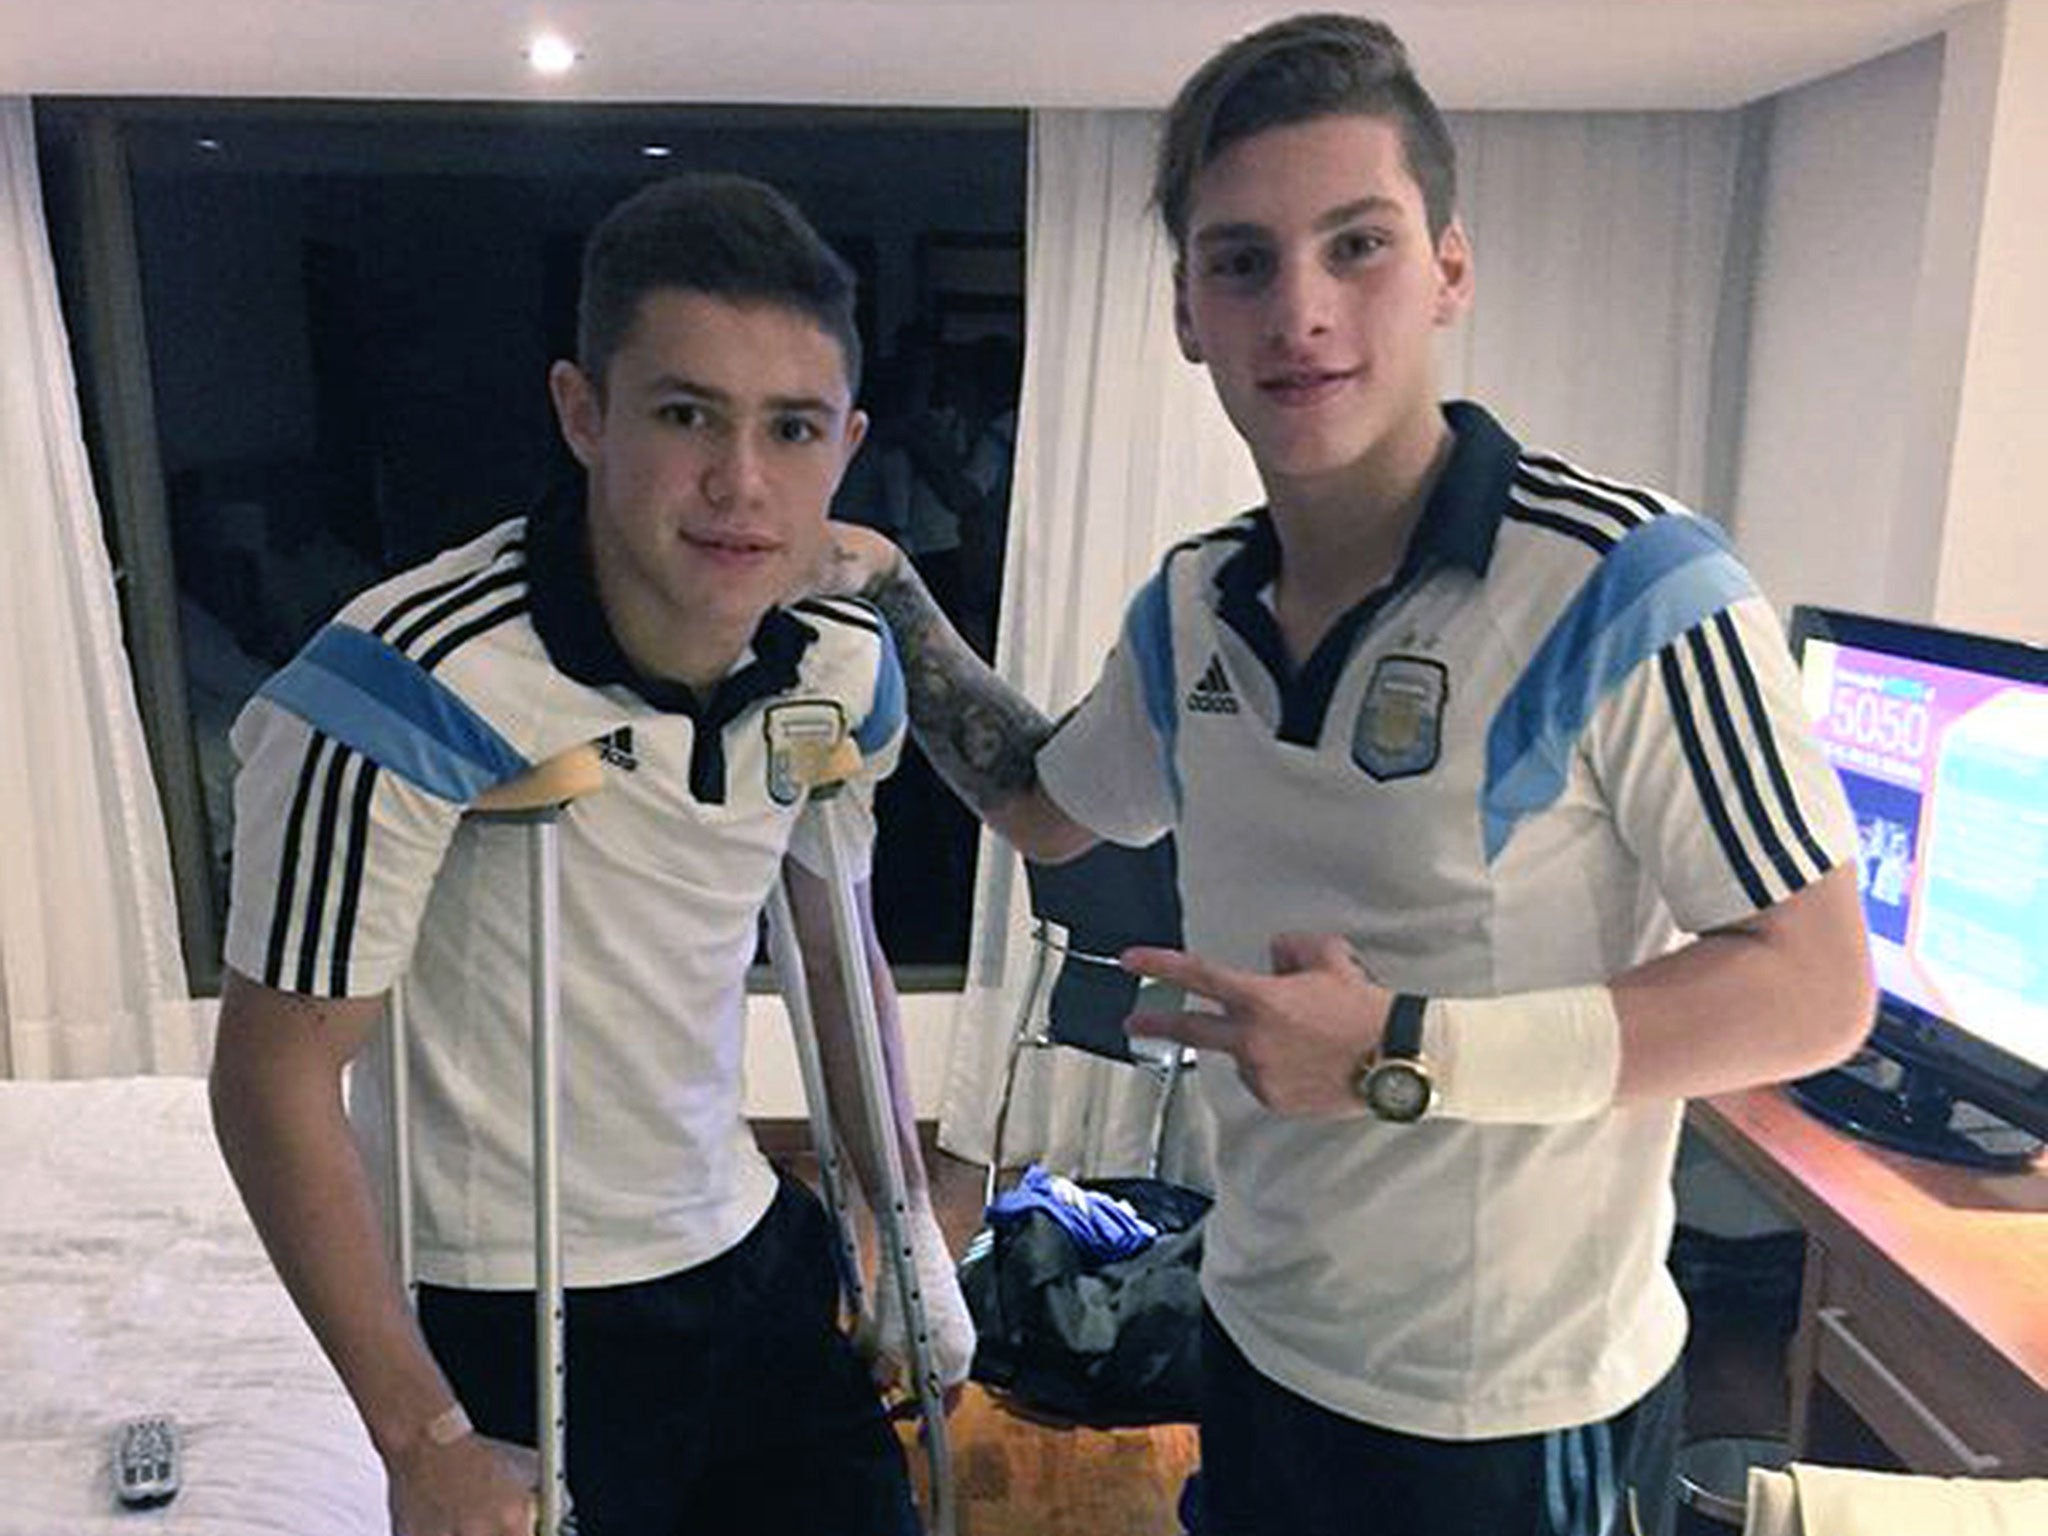 Argentina Under-21s striker Thomas Conechny fell out of a hotel window while playing Fifa